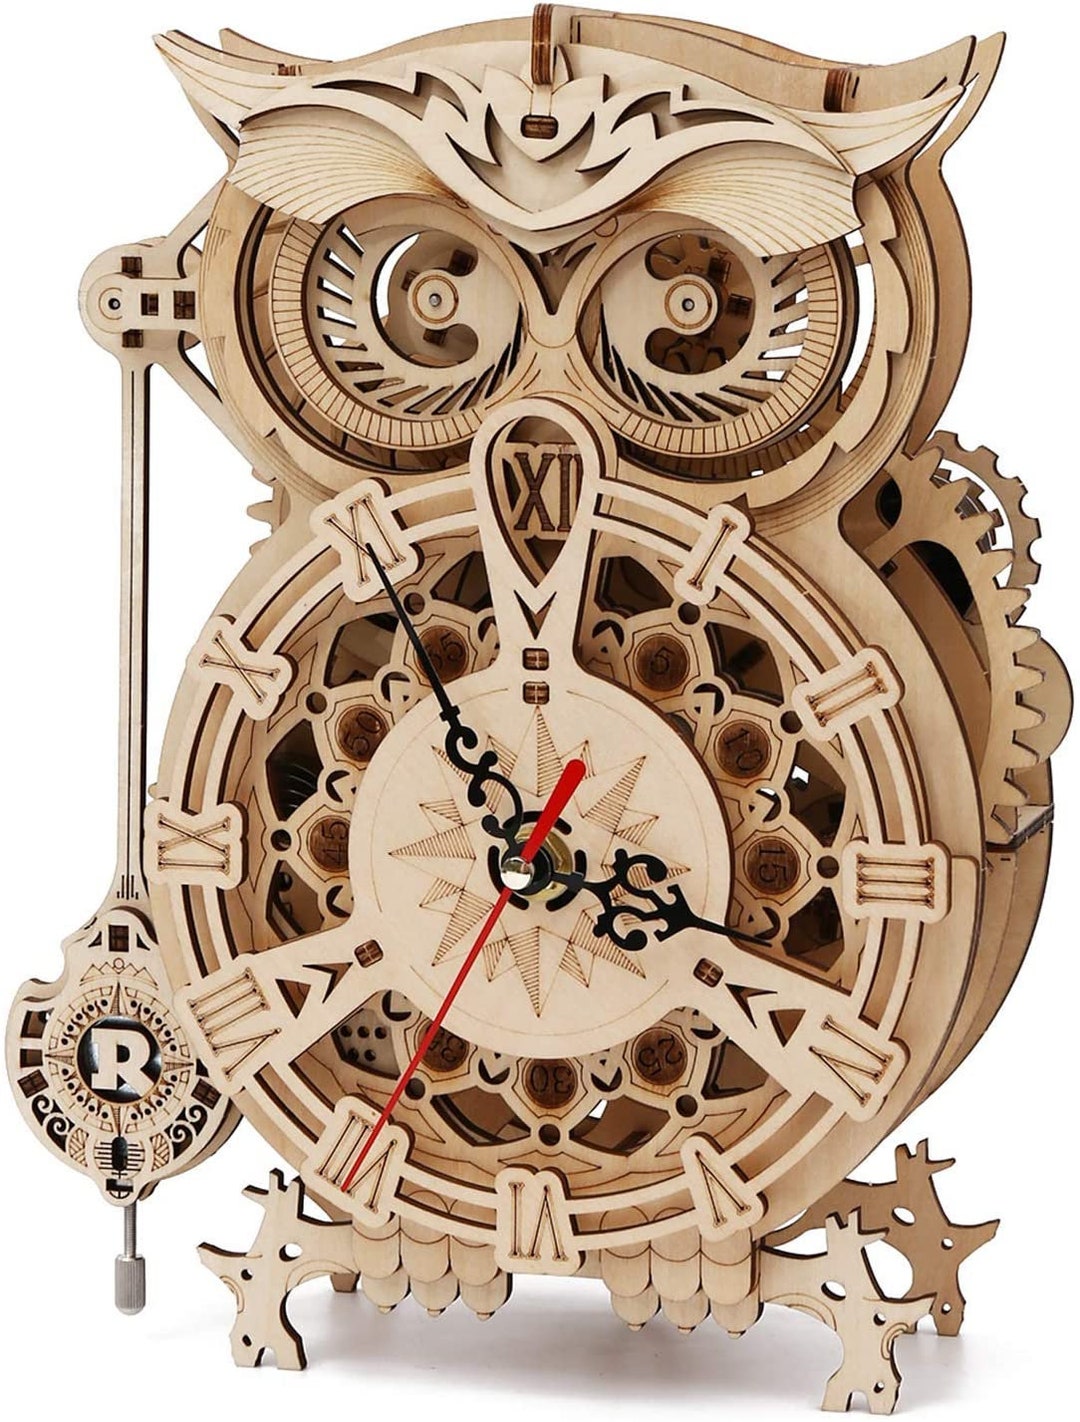 3D Wooden Puzzle Mechanical Gear Clock Owl Home Office Decor - Etsy